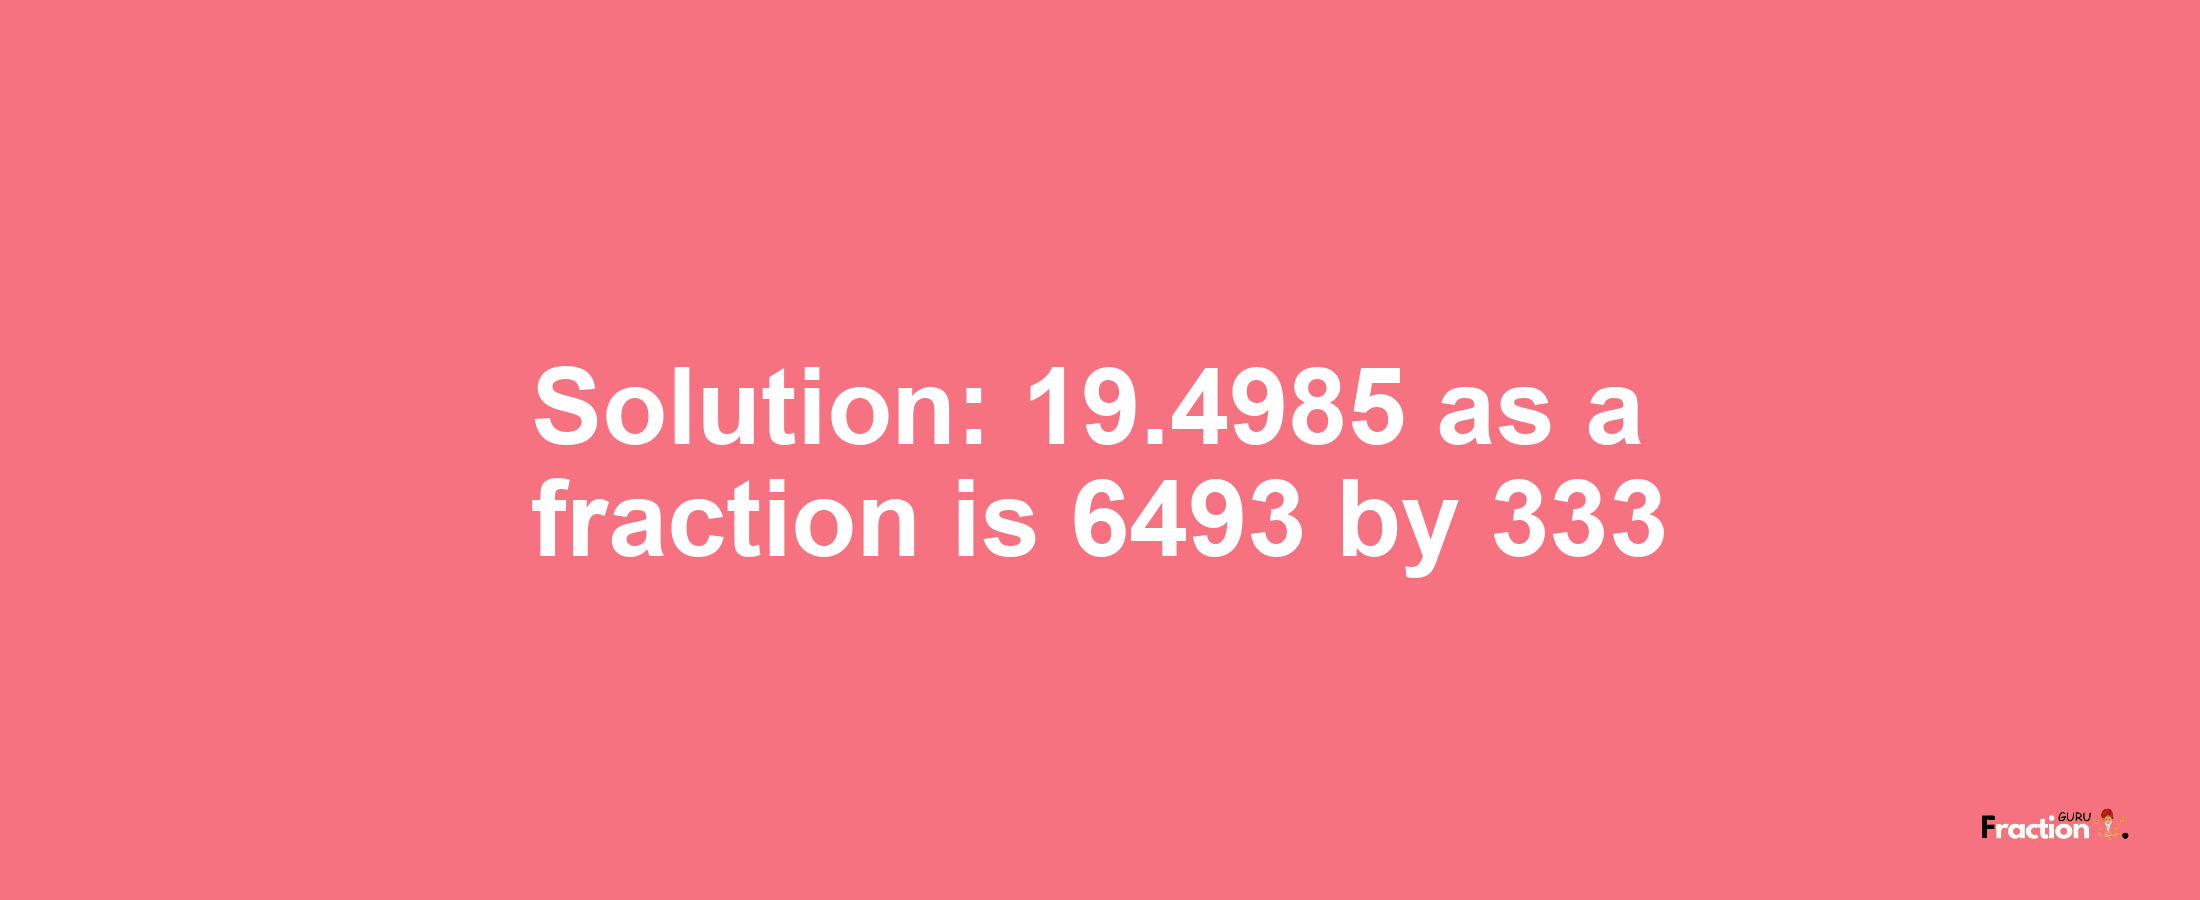 Solution:19.4985 as a fraction is 6493/333